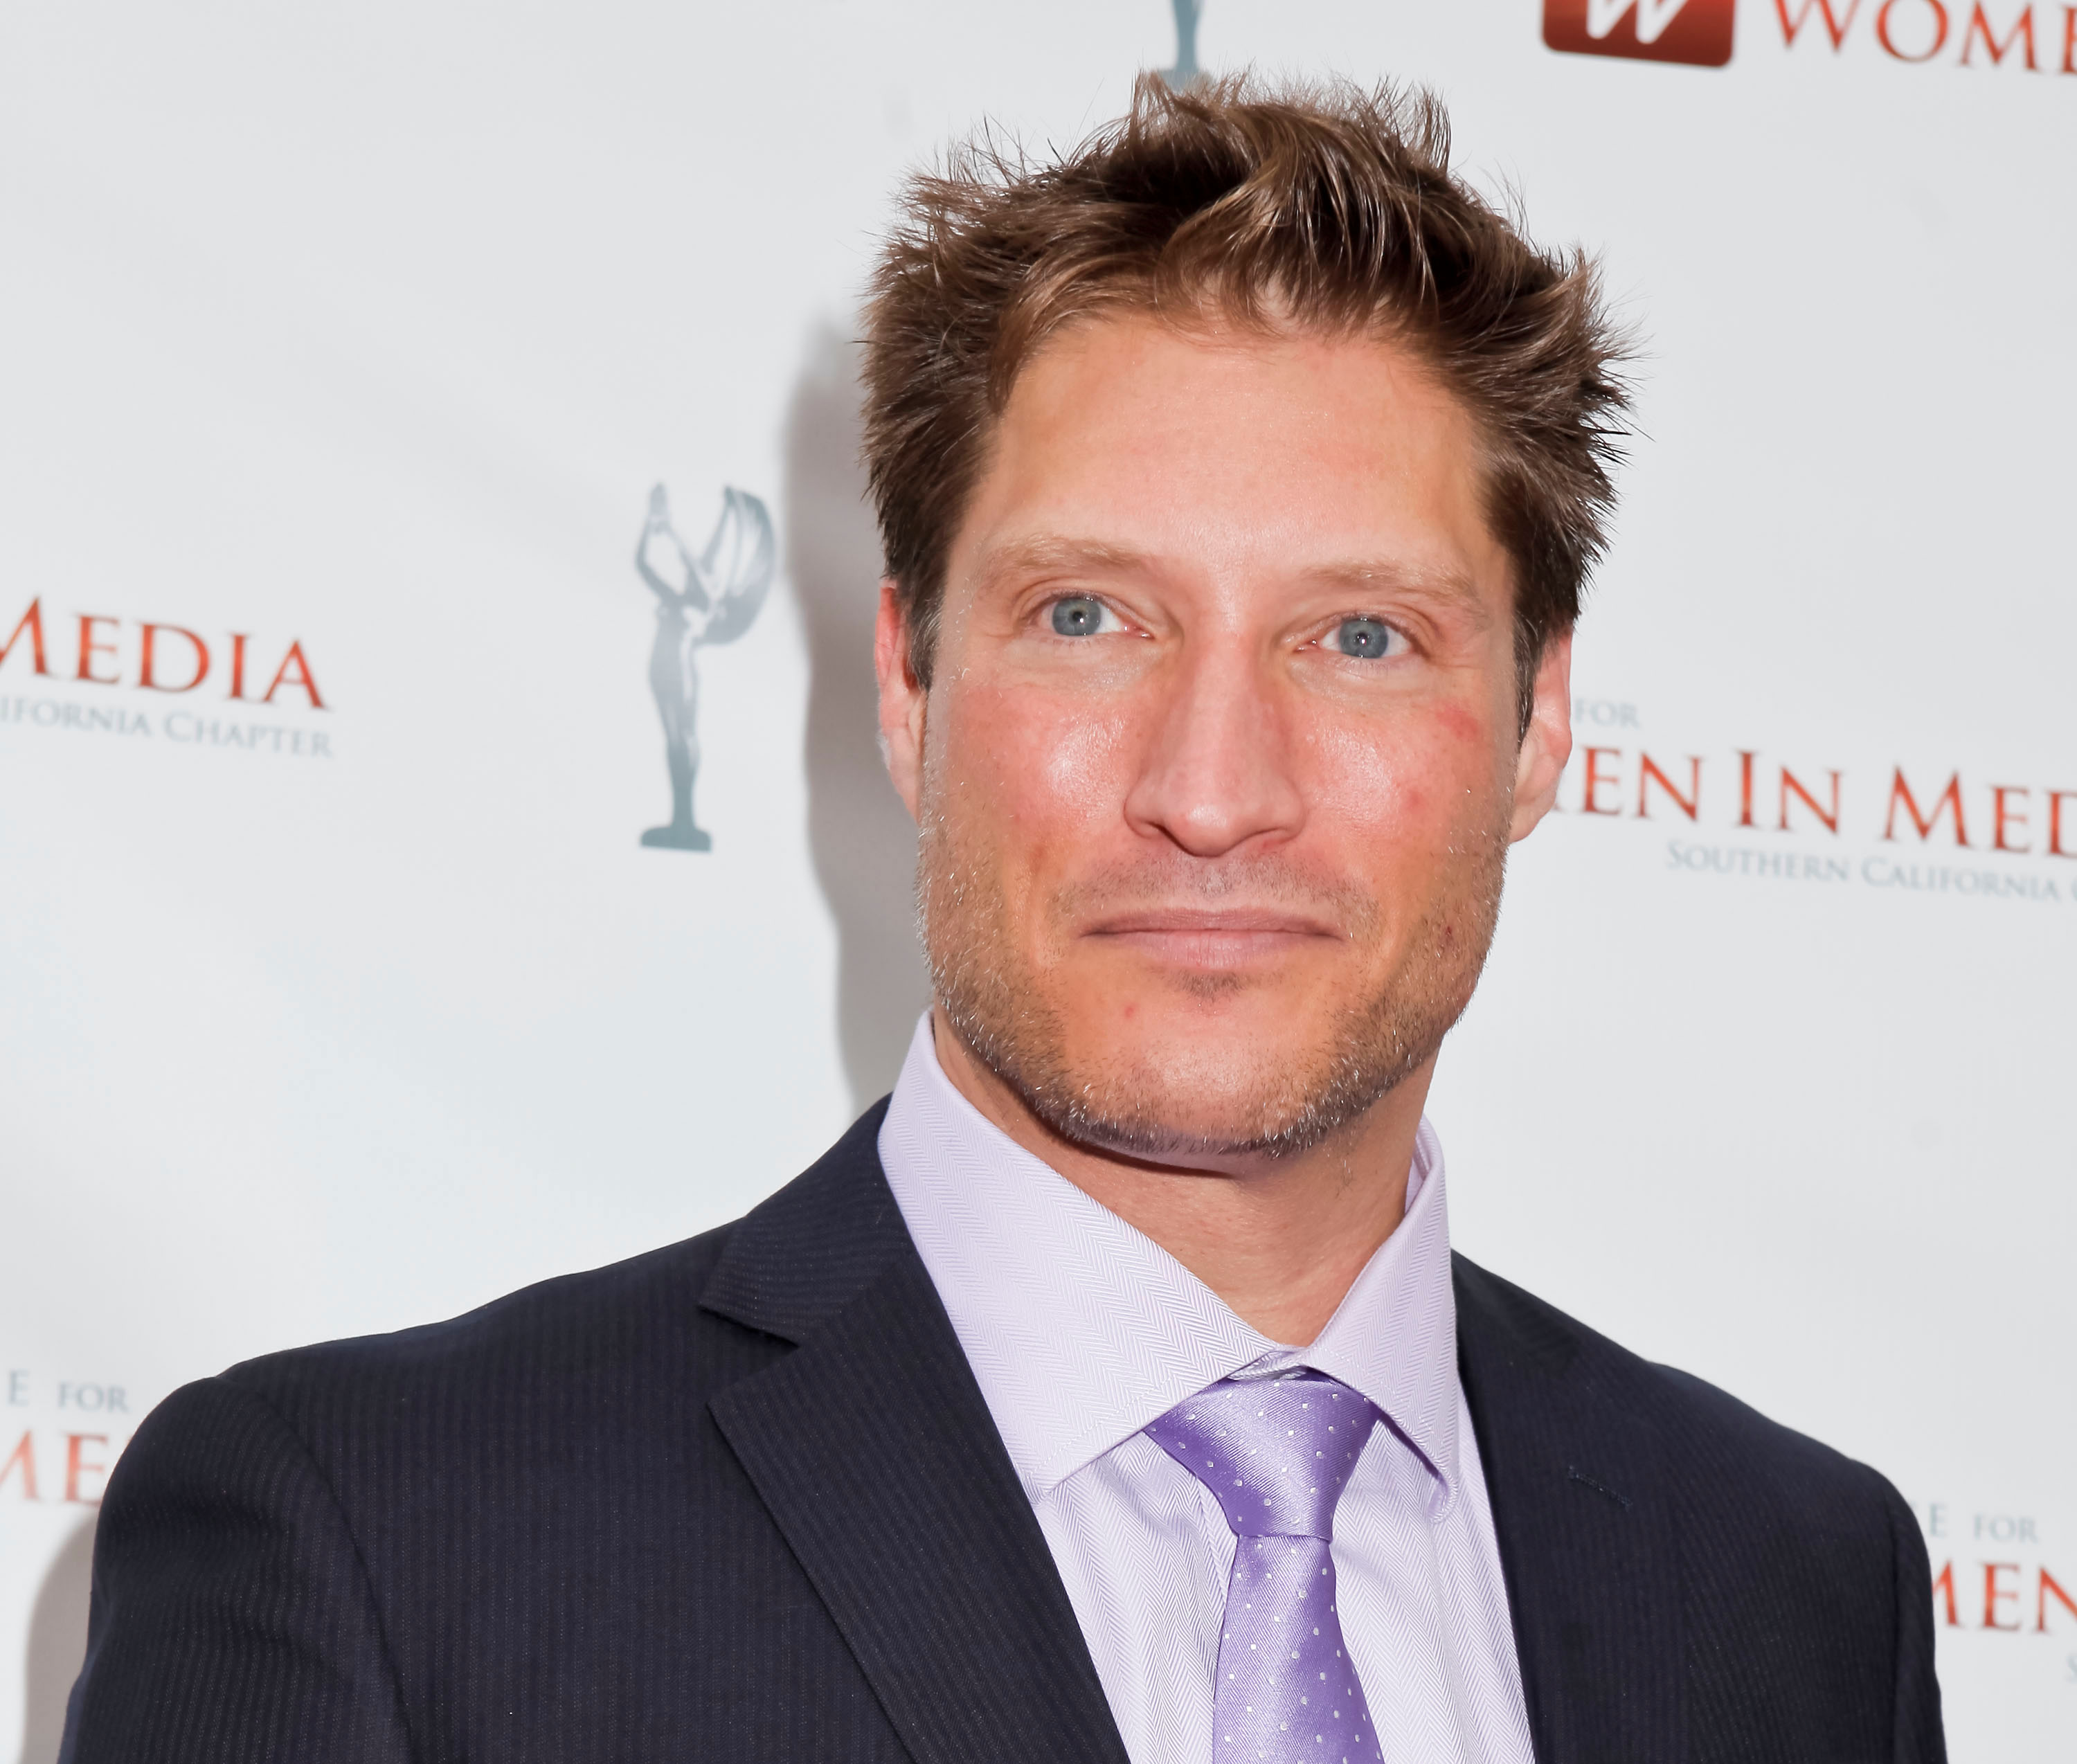 'The Bold and the Beautiful' actor Sean Kanan wearing a blue suit, white shirt, and lavender tie.